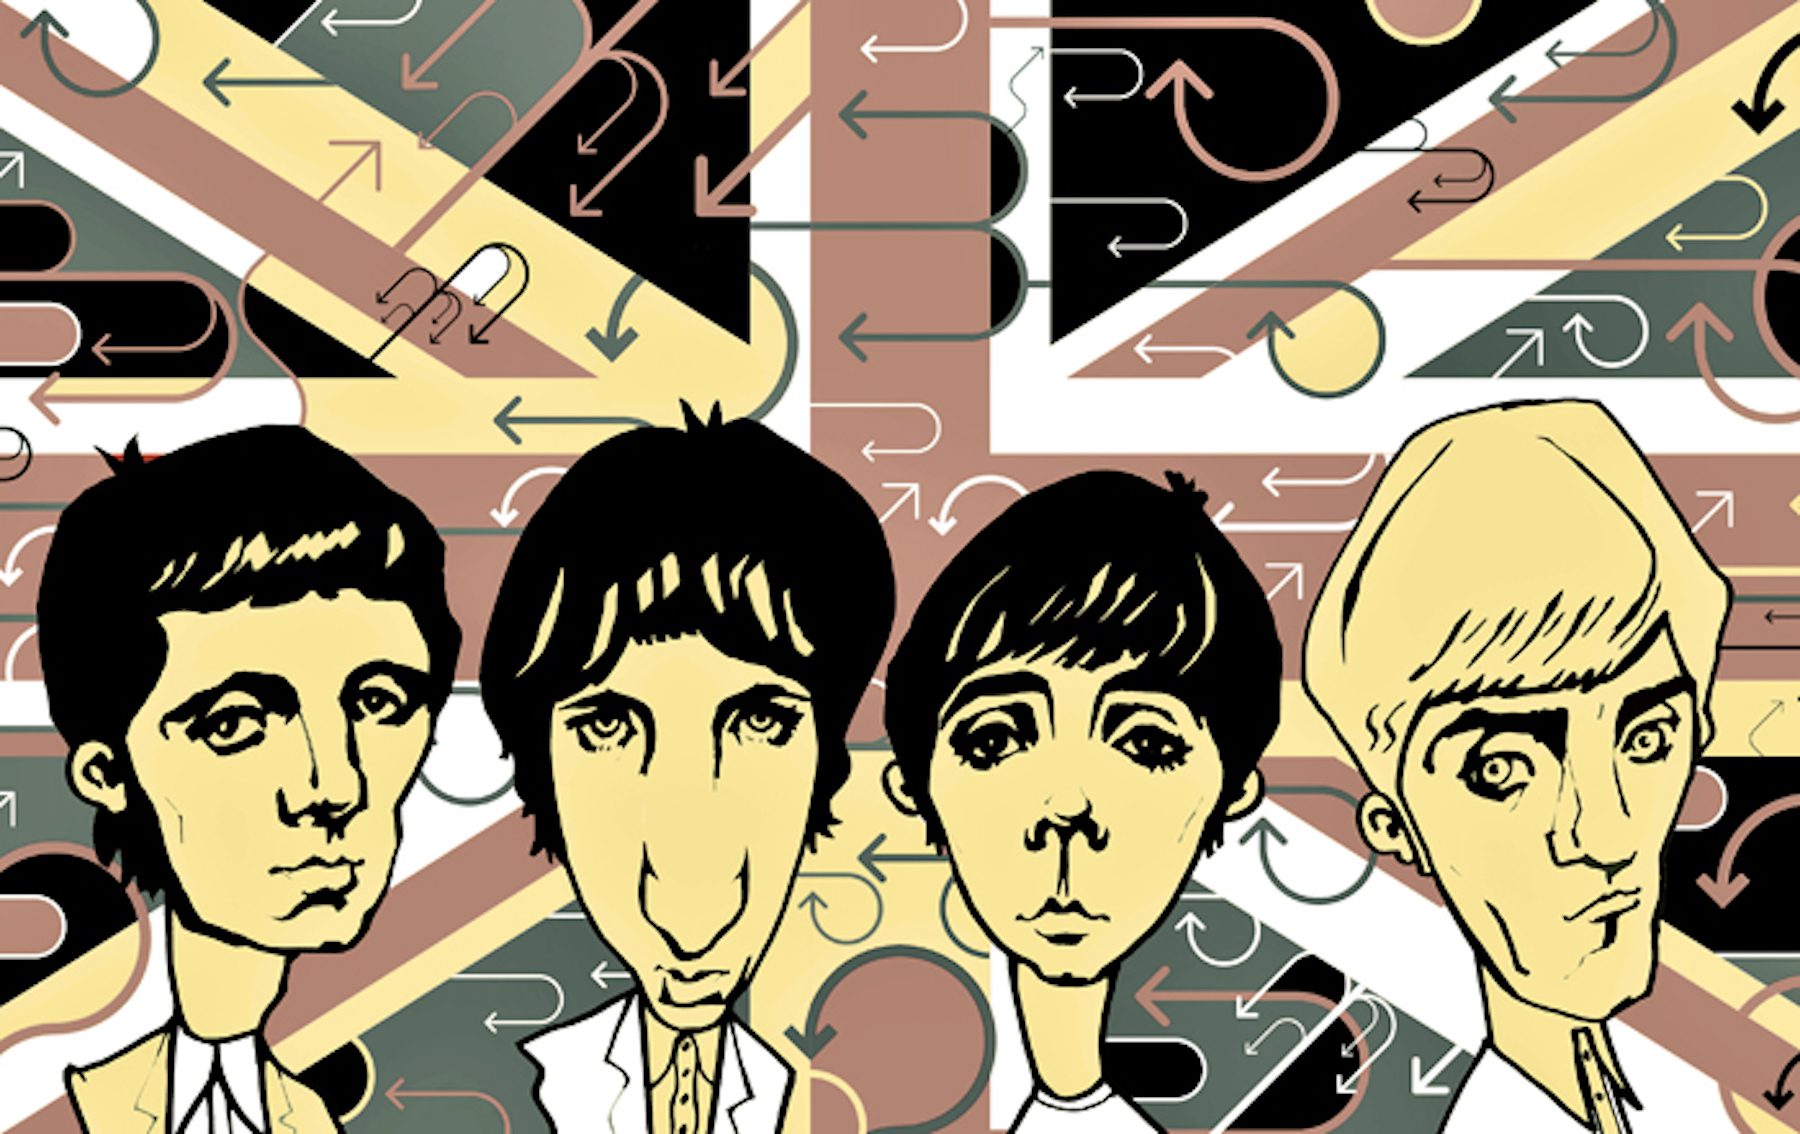 Rock and roll members of the who depicted in a cartoon style animation with an abstract version of the UK flag behind them. 